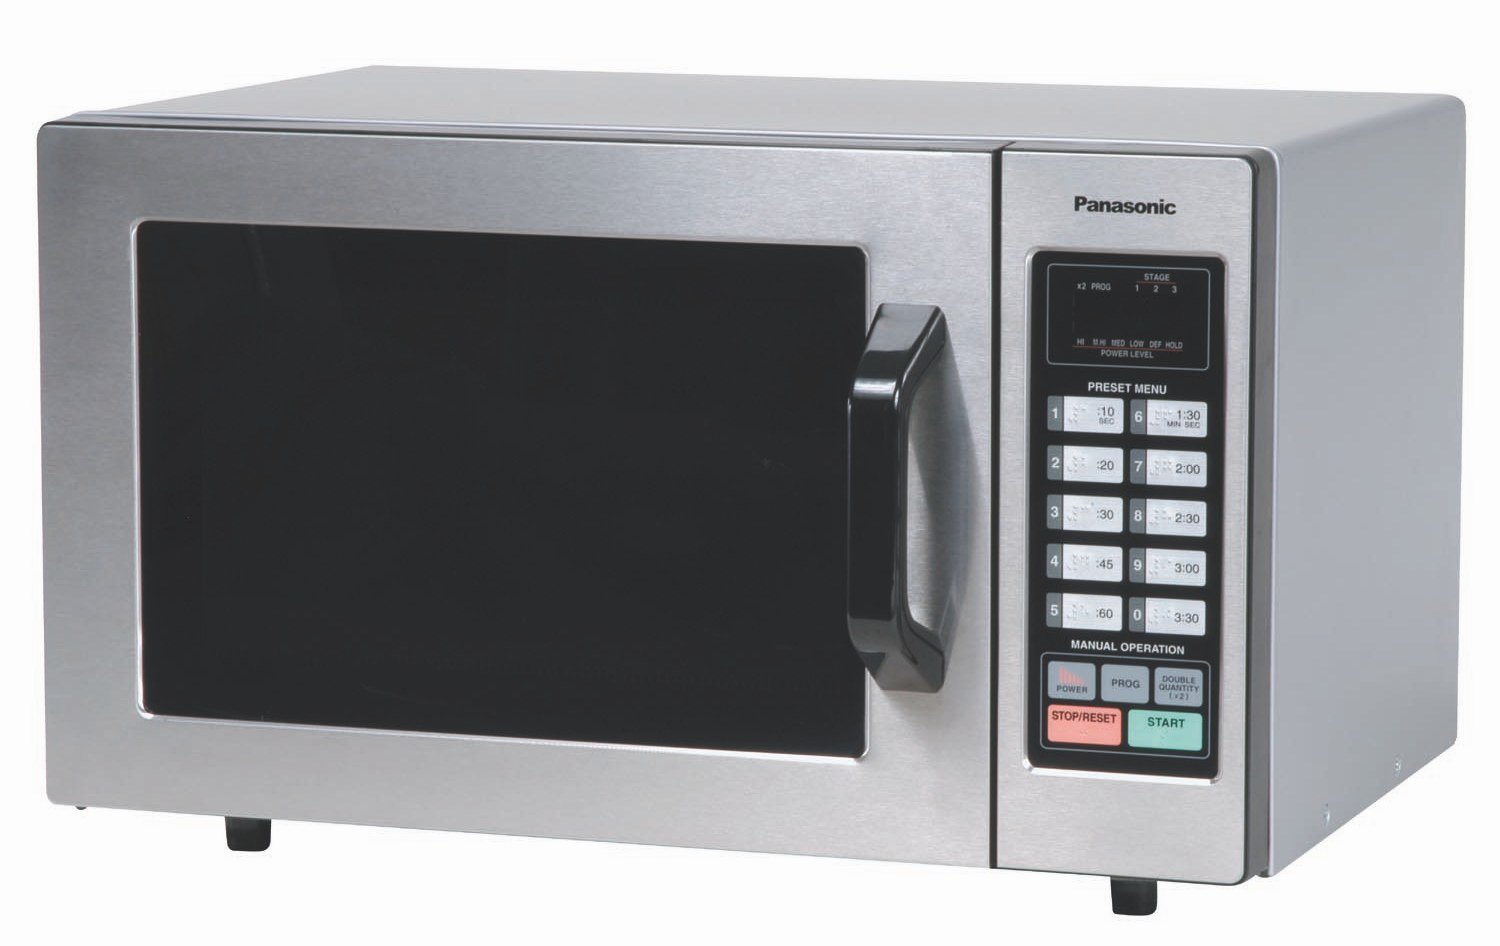 Panasonic NE-1054F Stainless 1000W 0.8 Cu. Ft. Commercial Microwave Oven with 10 Programmable Memory and Touch Screen Control